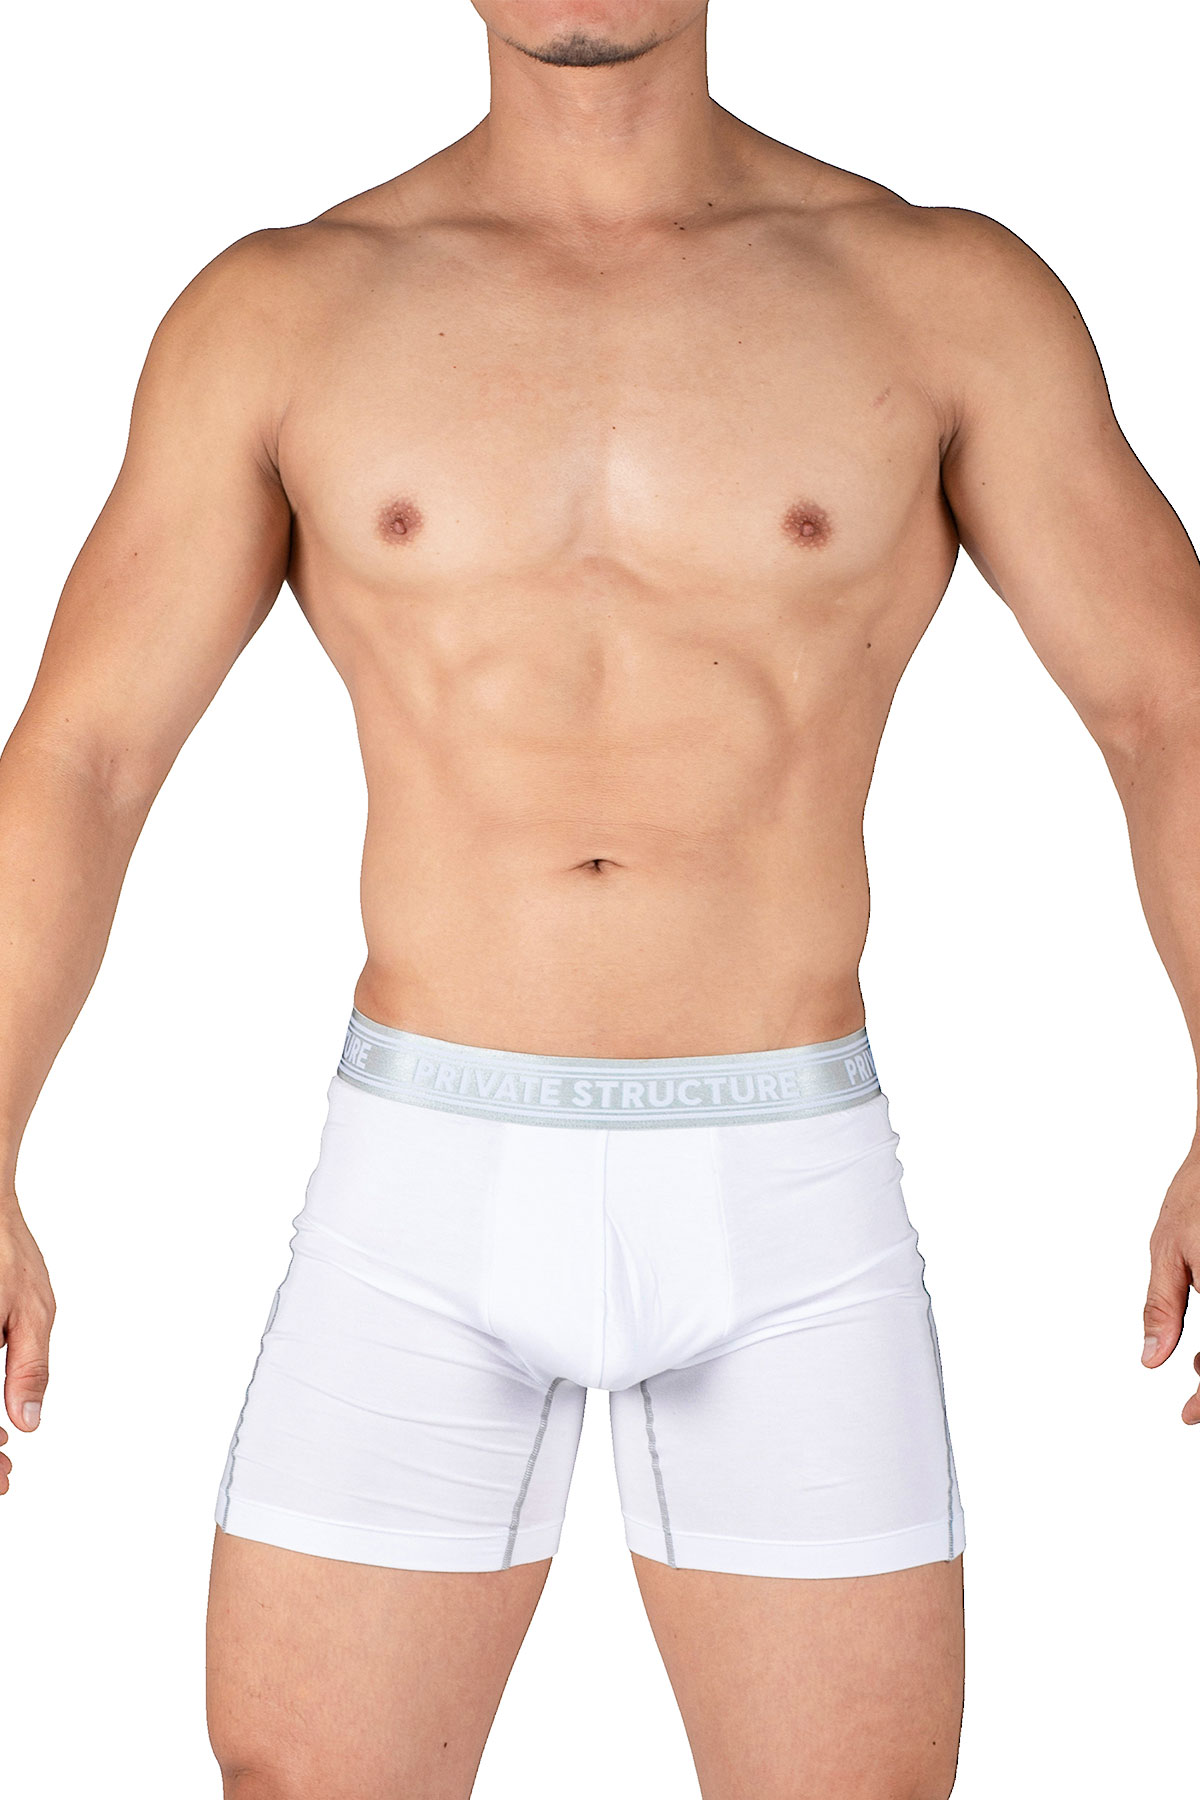 https://cdn11.bigcommerce.com/s-6ehfk/images/stencil/original/products/11294/32944/Private-Structure-Bamboo-Viscose-Mid-Waist-Boxer-Brief-Bright-White-PBUT4380-BTWH-F__80858.1673233046.jpg?c=2?c=2&imbypass=on&imbypass=on